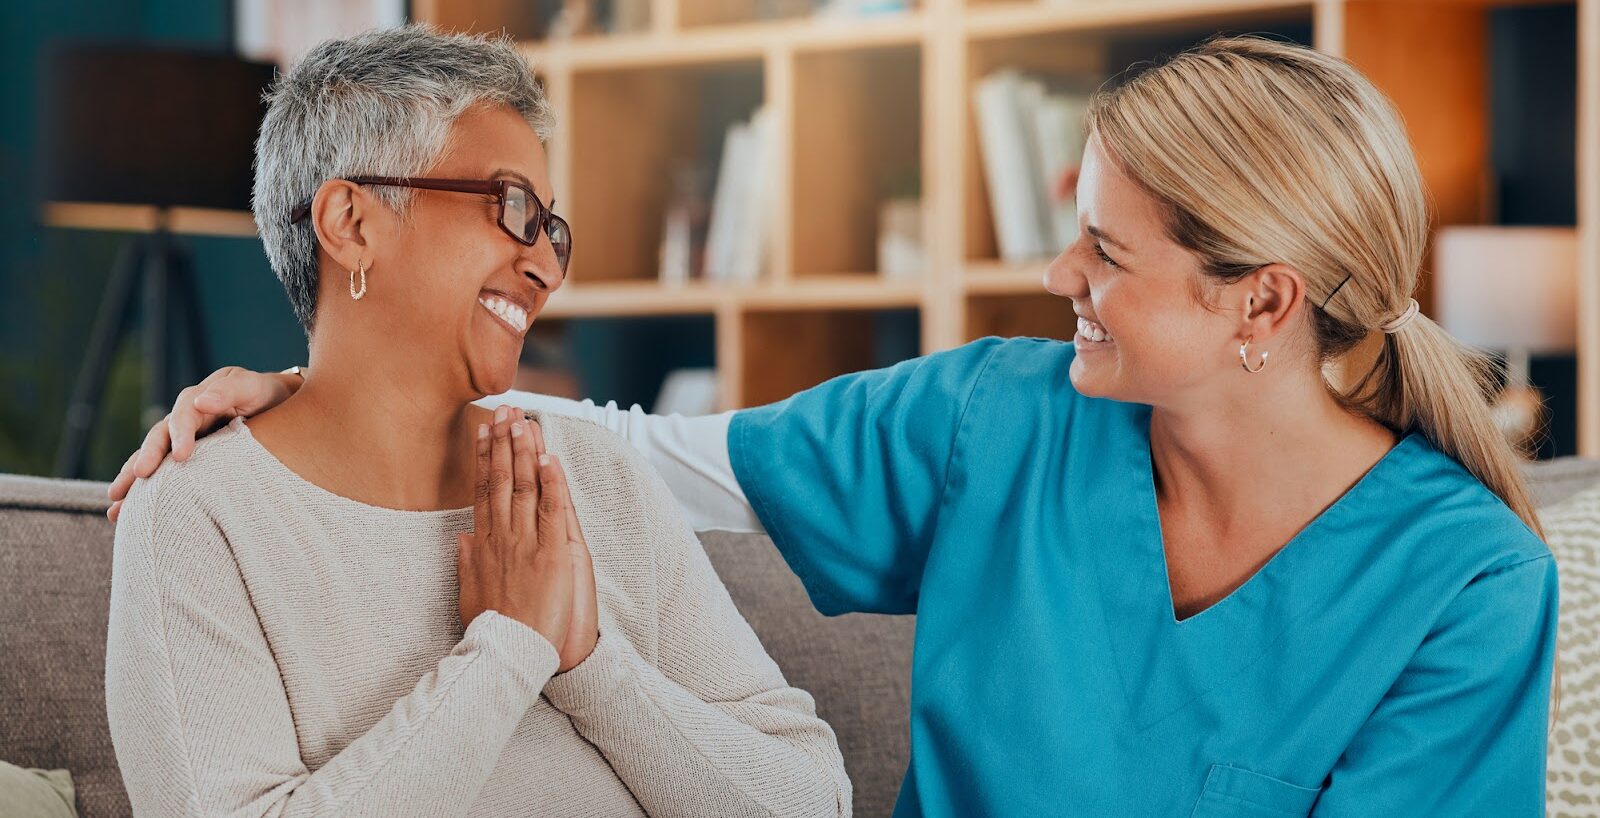 How Can You Care For and Help a Caregiver?